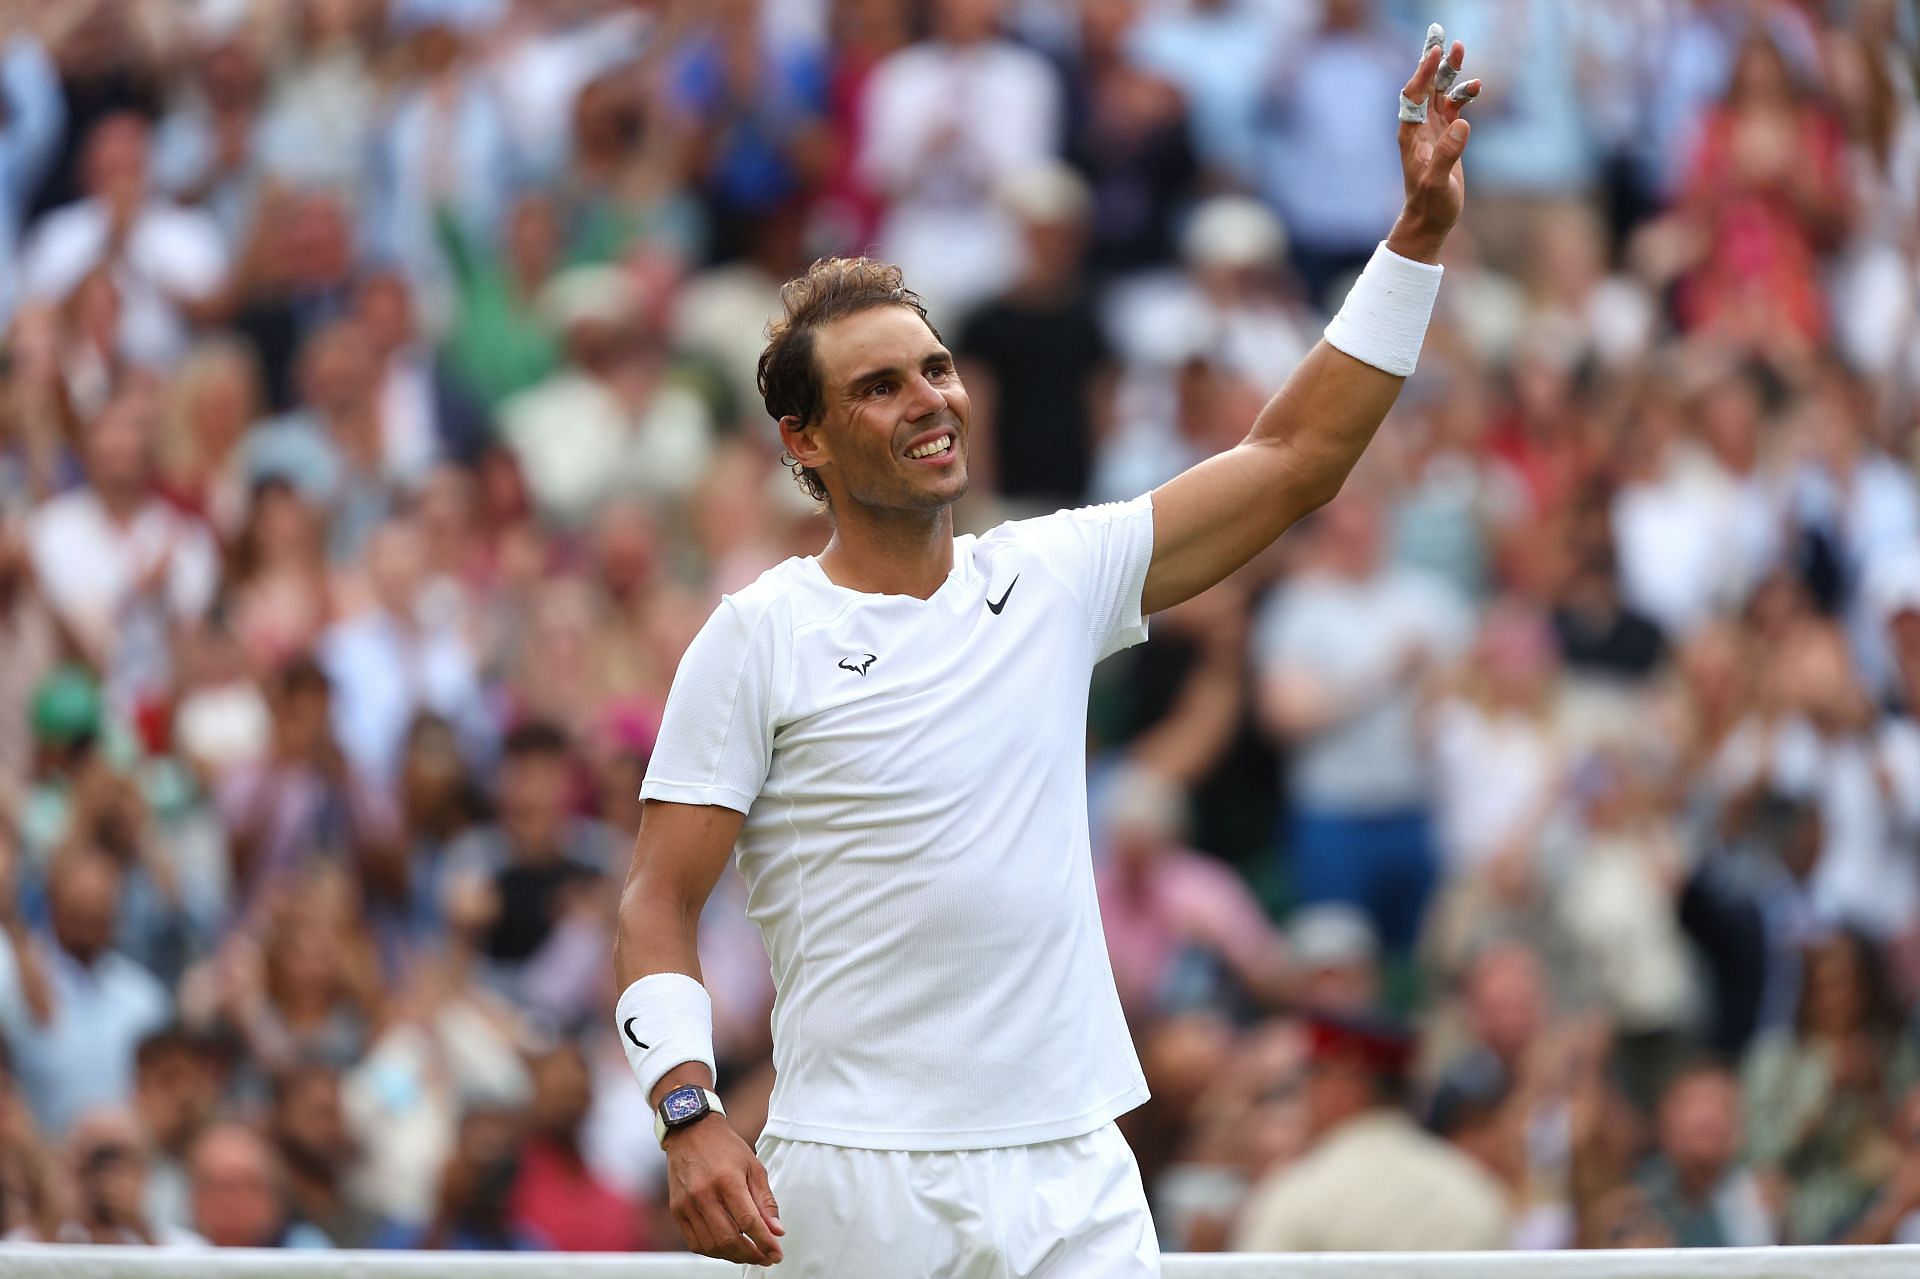 Rafael Nadal withdrew from Wimbledon before the semifinals.